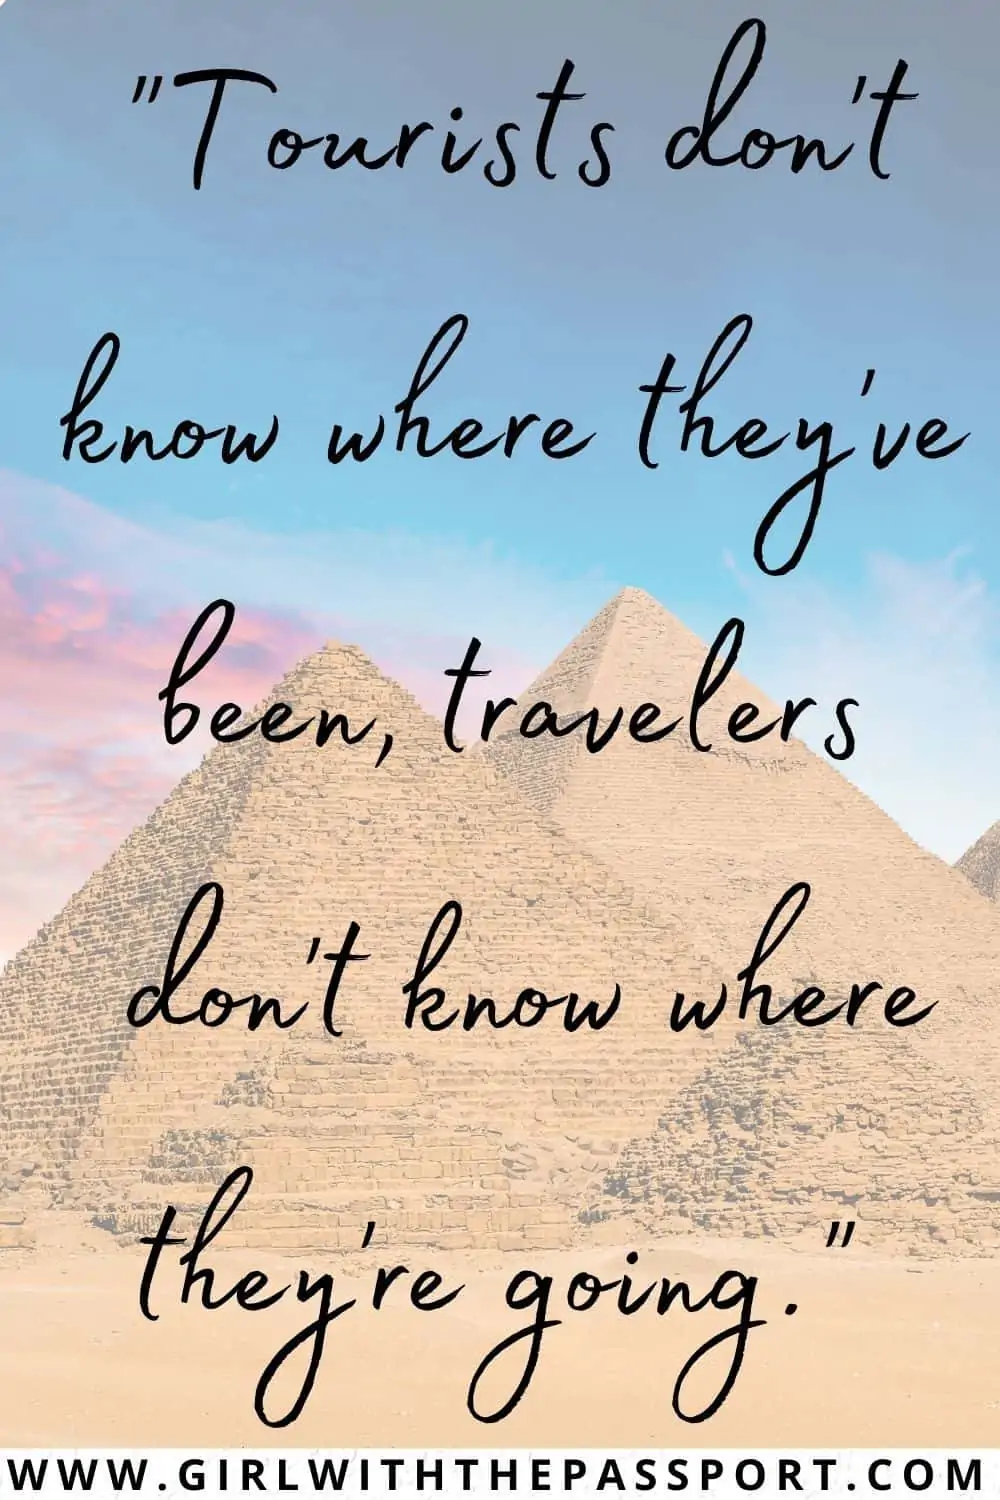 A picture of the pyramids of Giza and a blue/pink sky in h background with an exploration caption that says 'Tourists don't know where they've been, travelers don't know where they're going.'